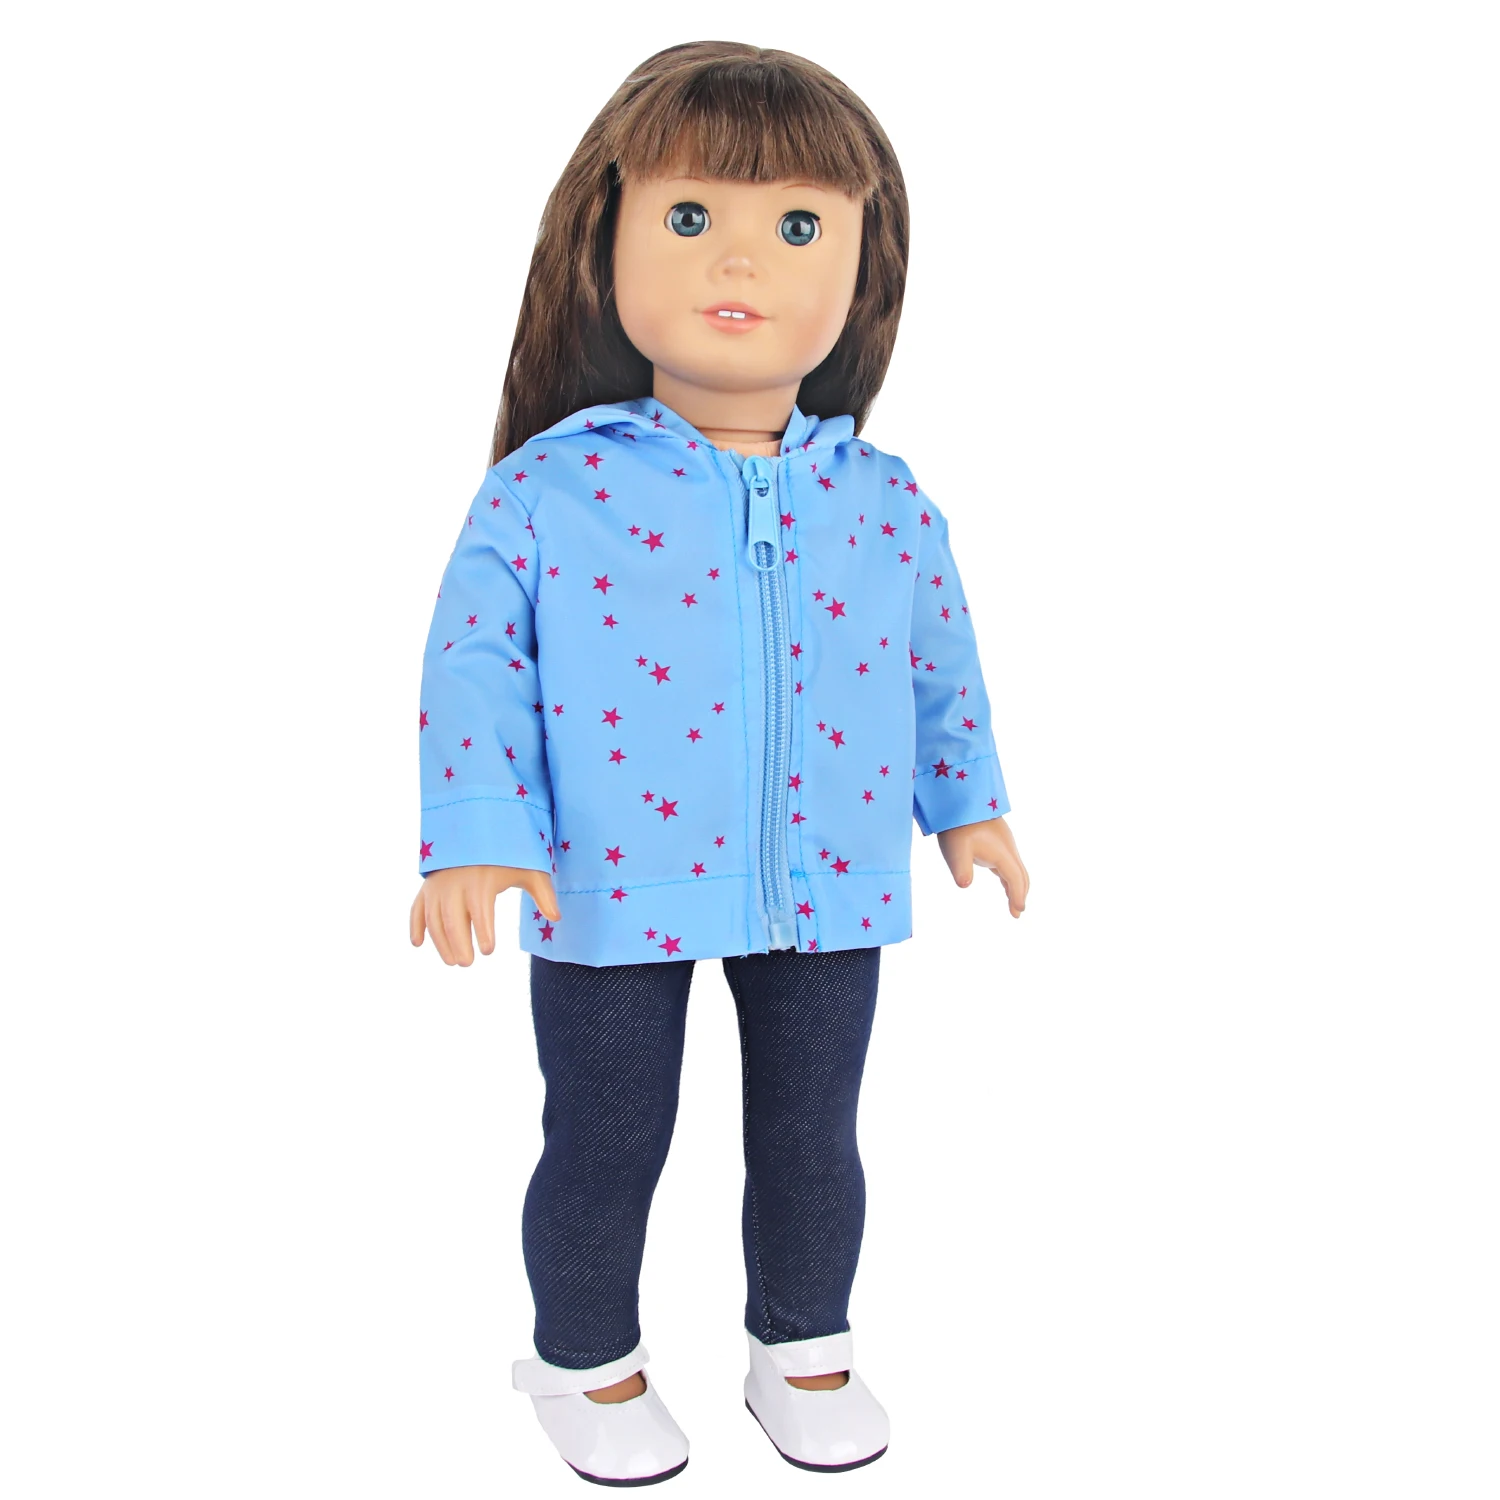 New arrival 18 inch doll clothes American doll girl raincoat sunscreen clothing